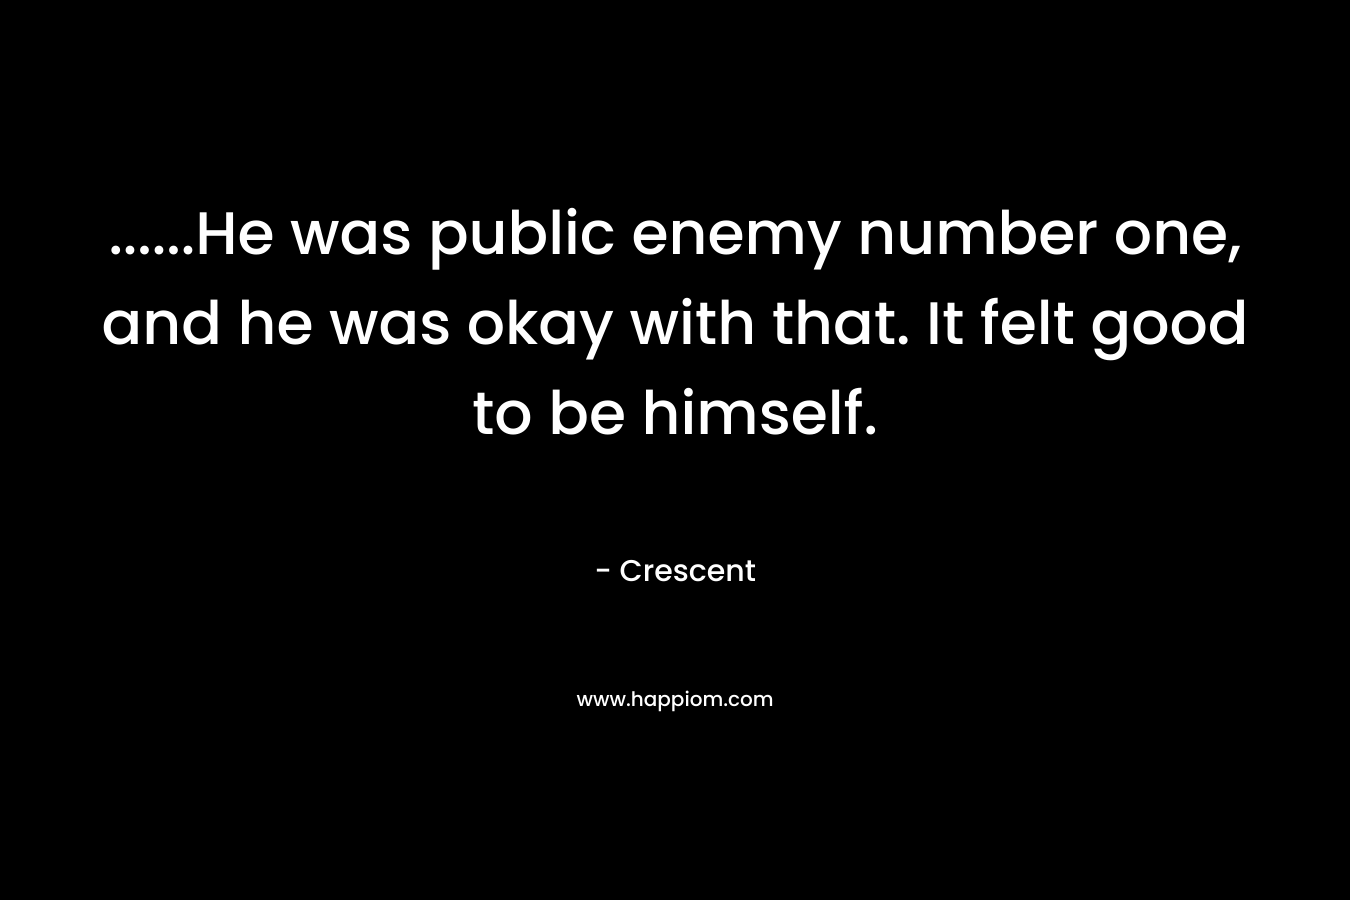 ……He was public enemy number one, and he was okay with that. It felt good to be himself. – Crescent